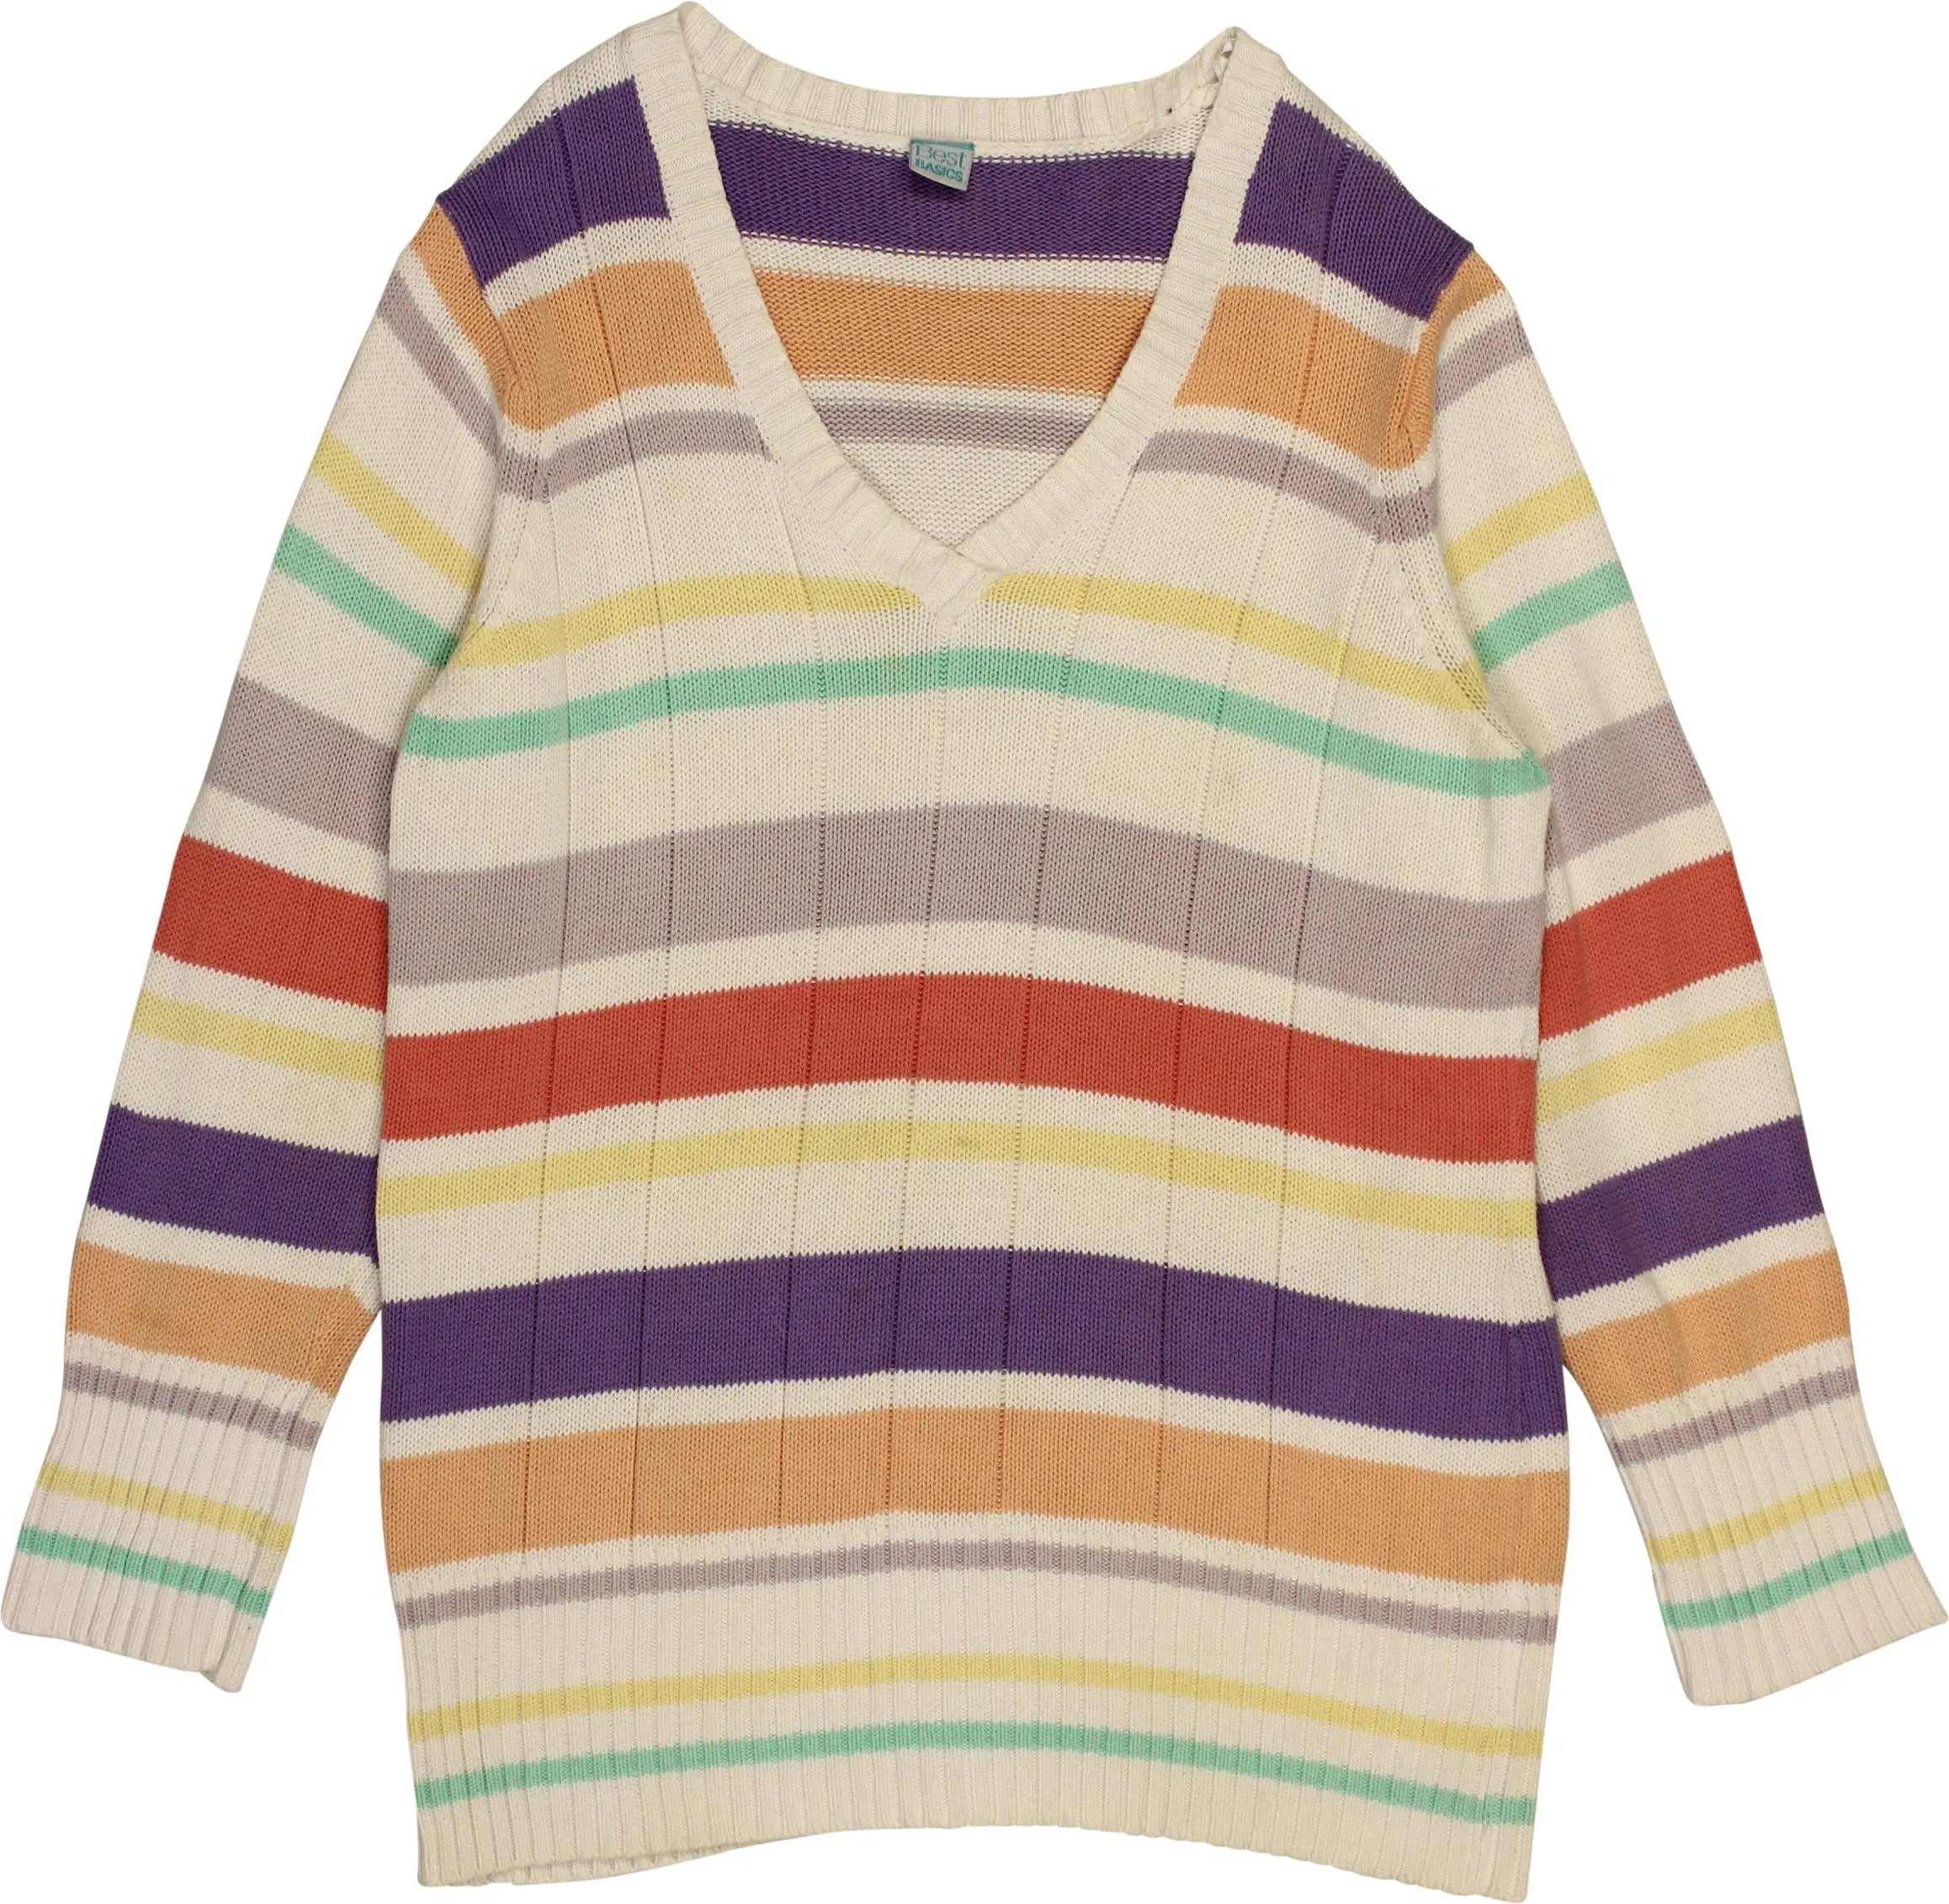 M&S - Striped Jumper- ThriftTale.com - Vintage and second handclothing